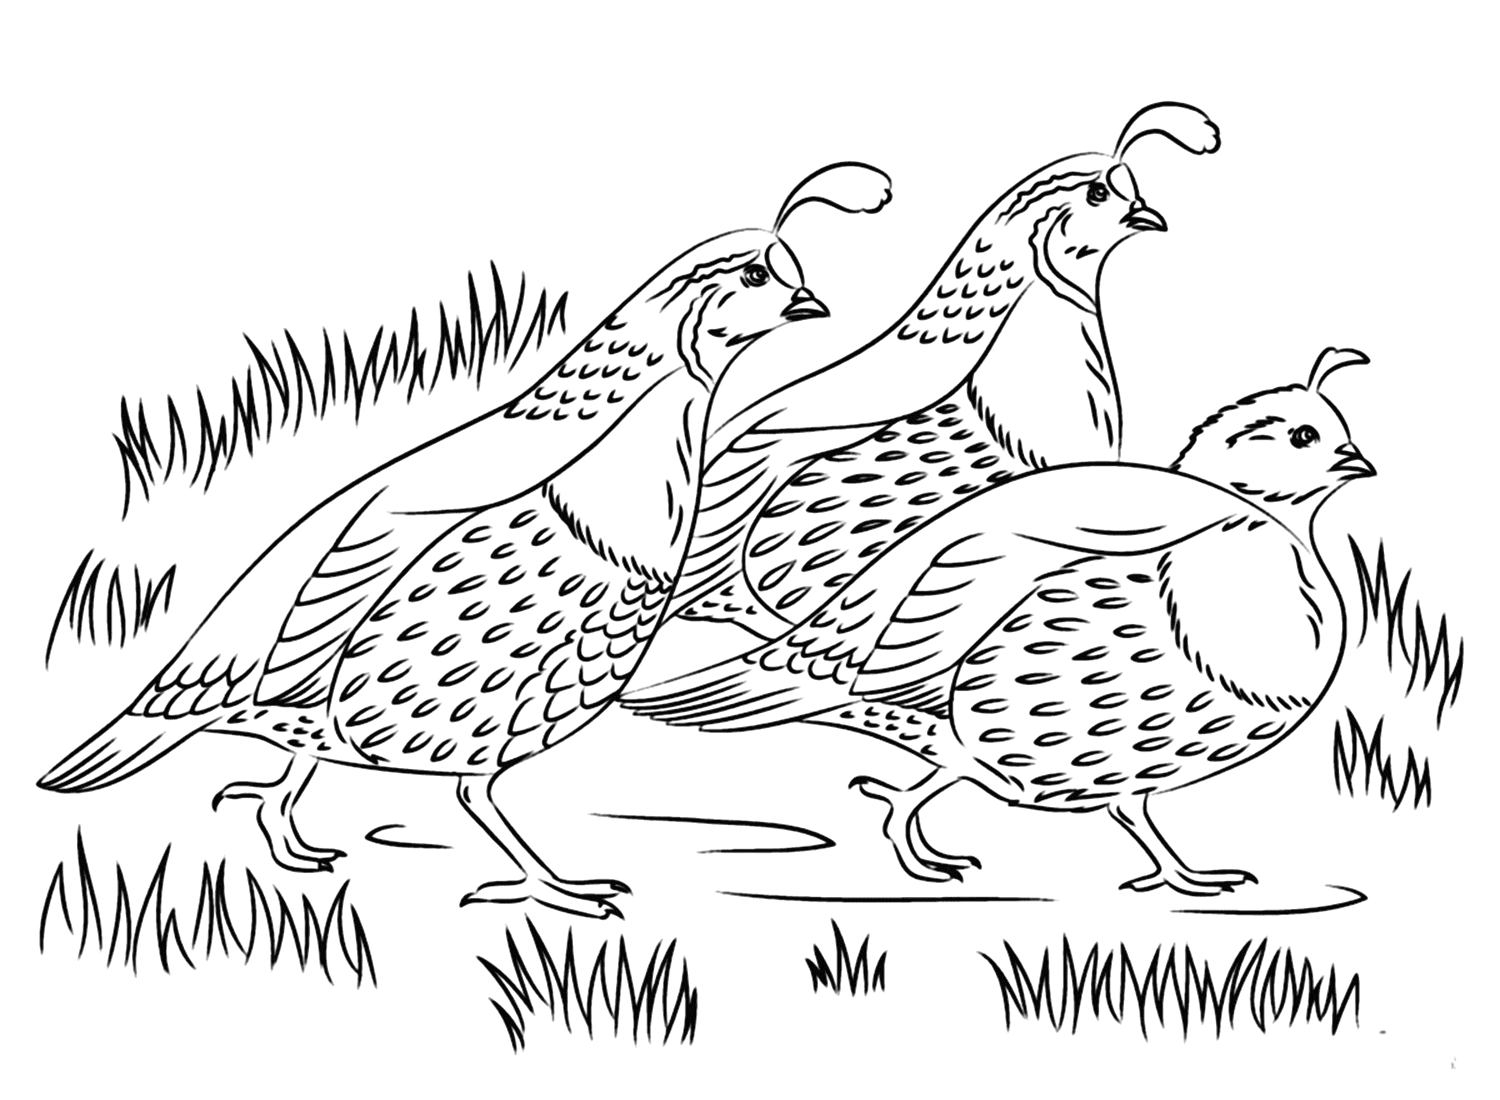 Quail Image To Color - Free Printable Coloring Pages